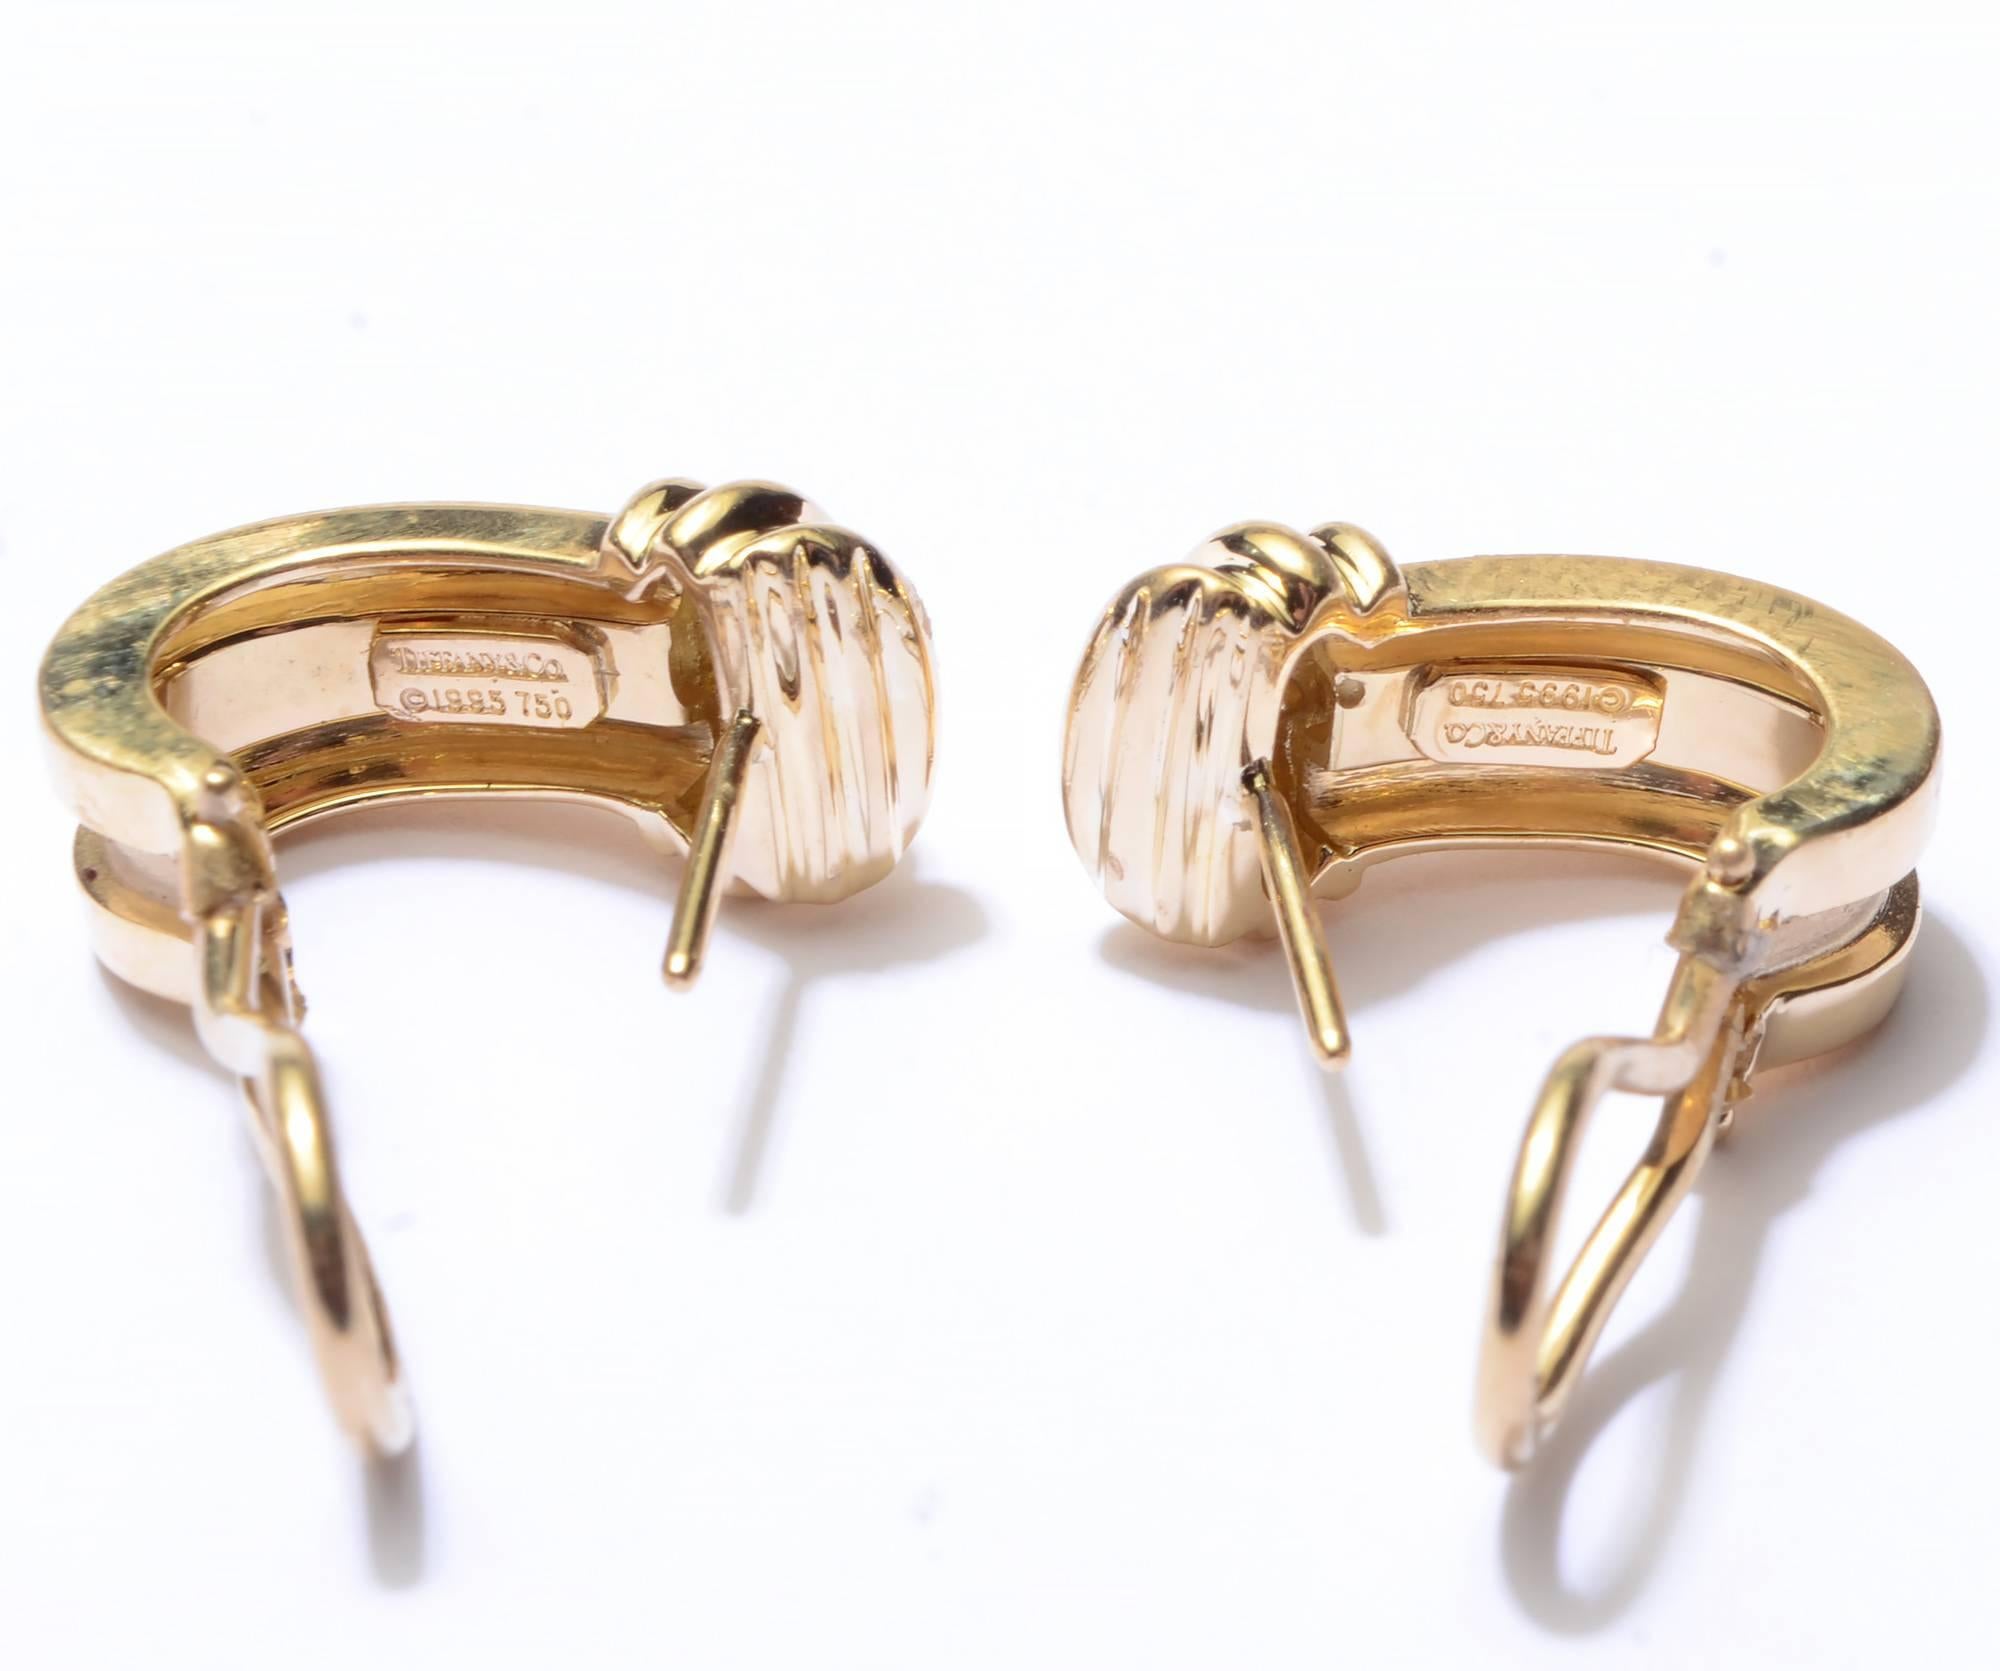 Medium size oval hoop earrings by Tiffany and Co. They measure 3/4